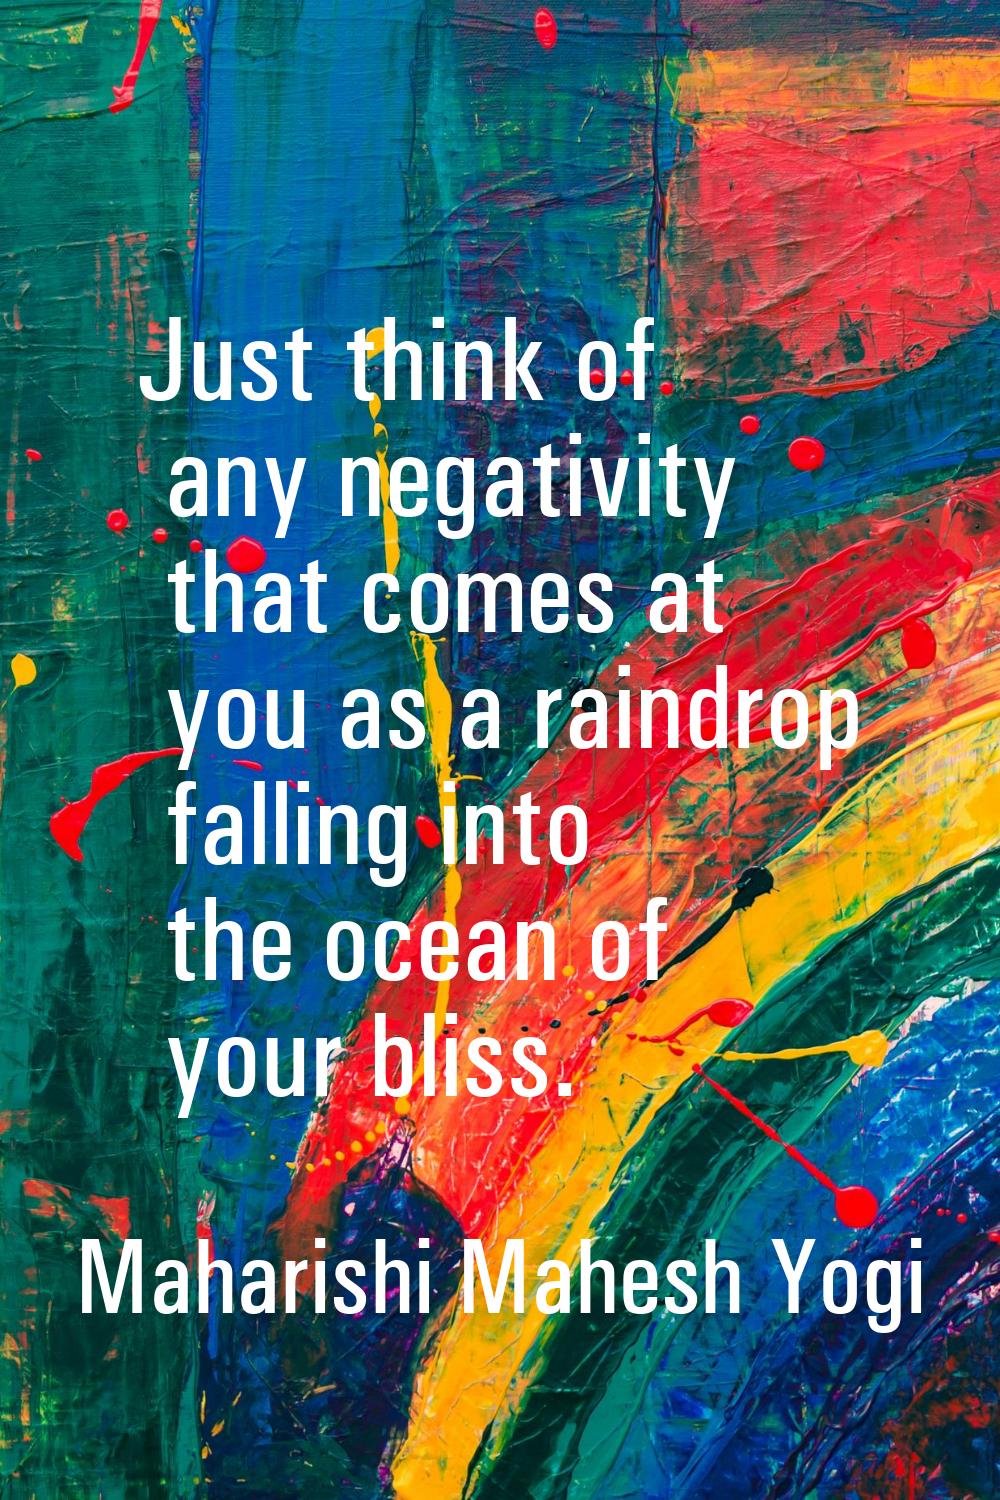 Just think of any negativity that comes at you as a raindrop falling into the ocean of your bliss.